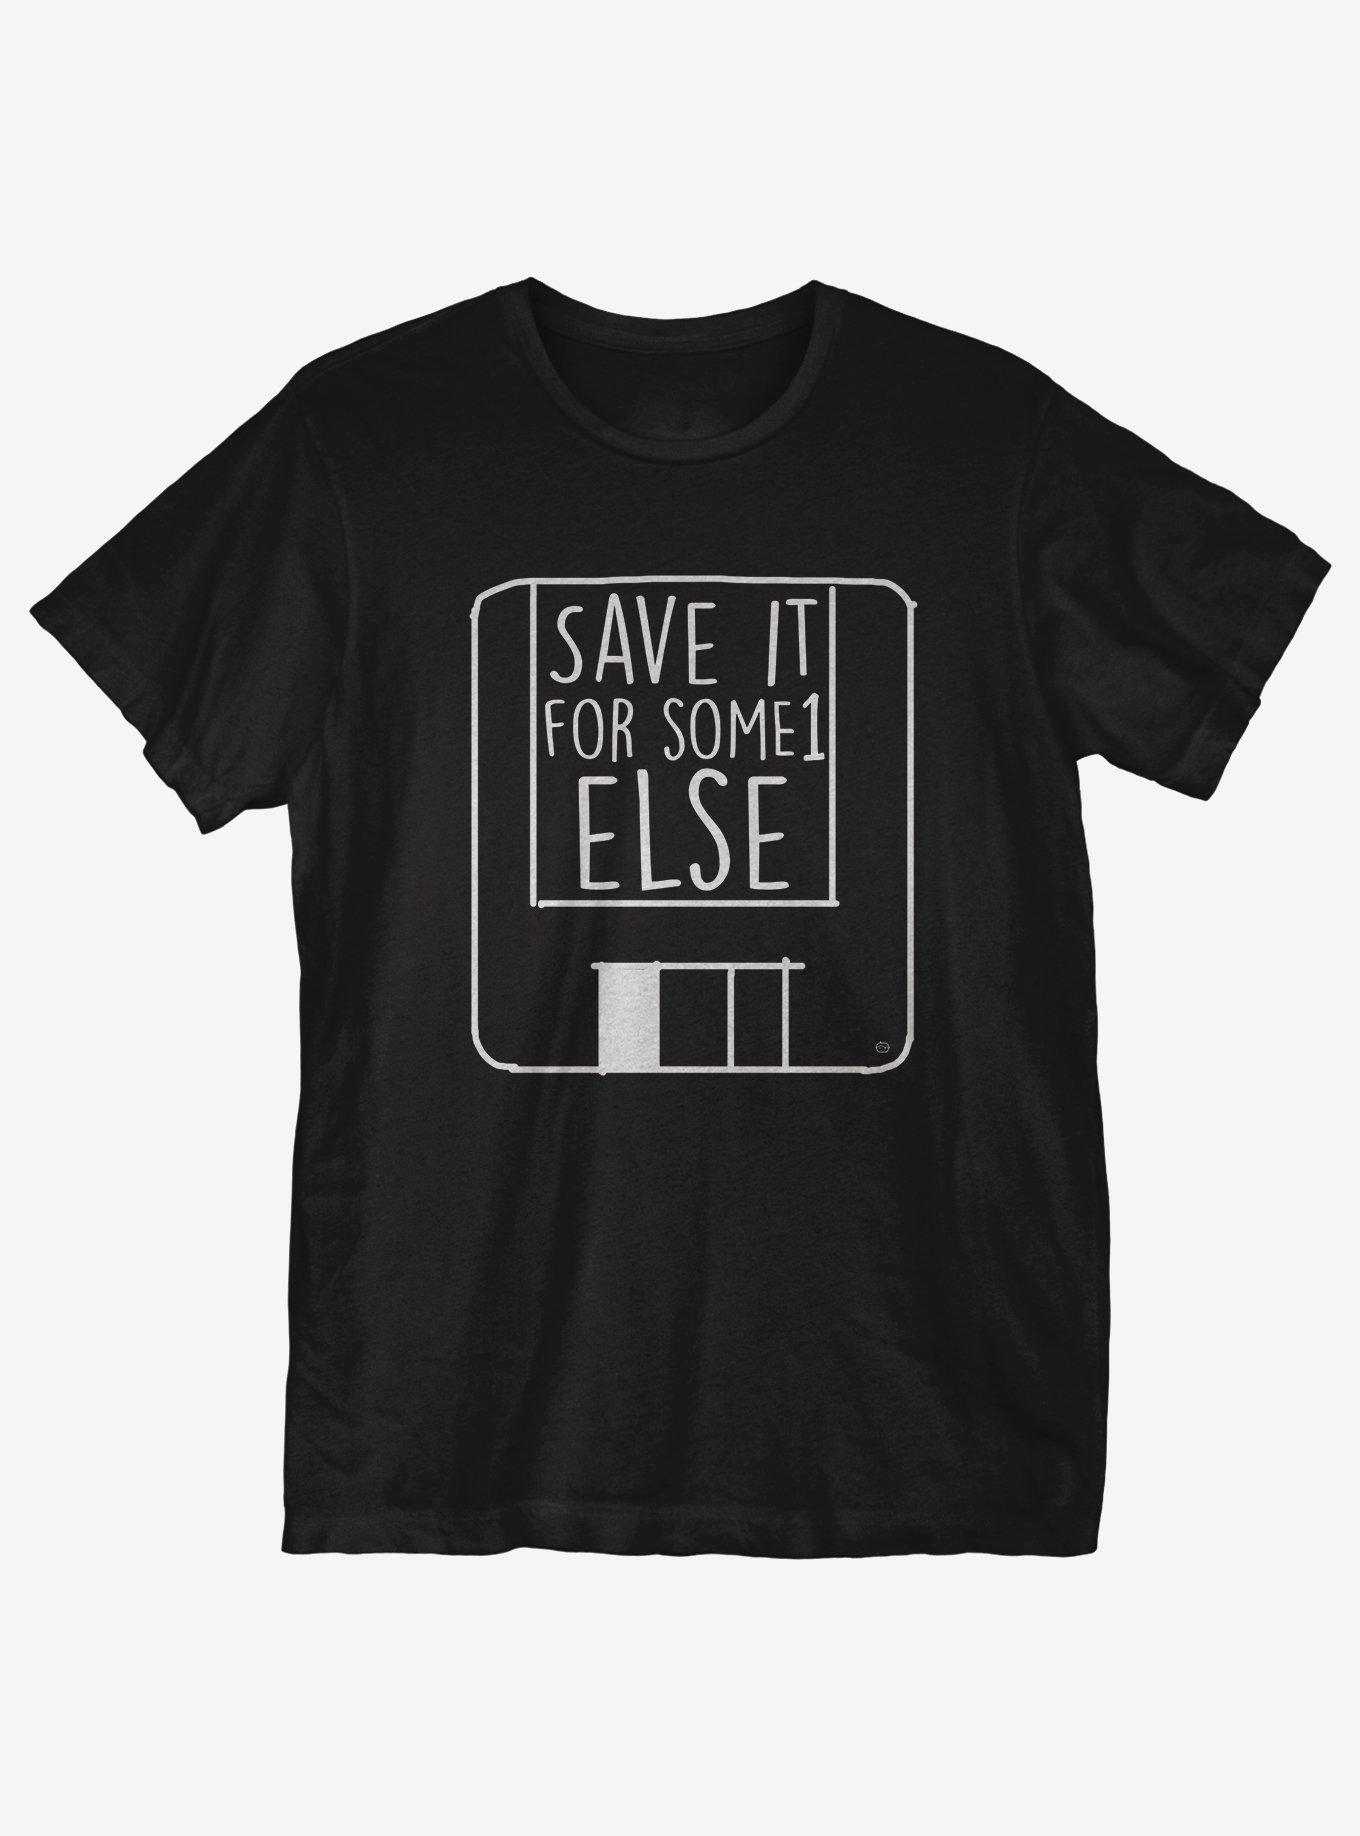 Save It For Some1 Else T-Shirt